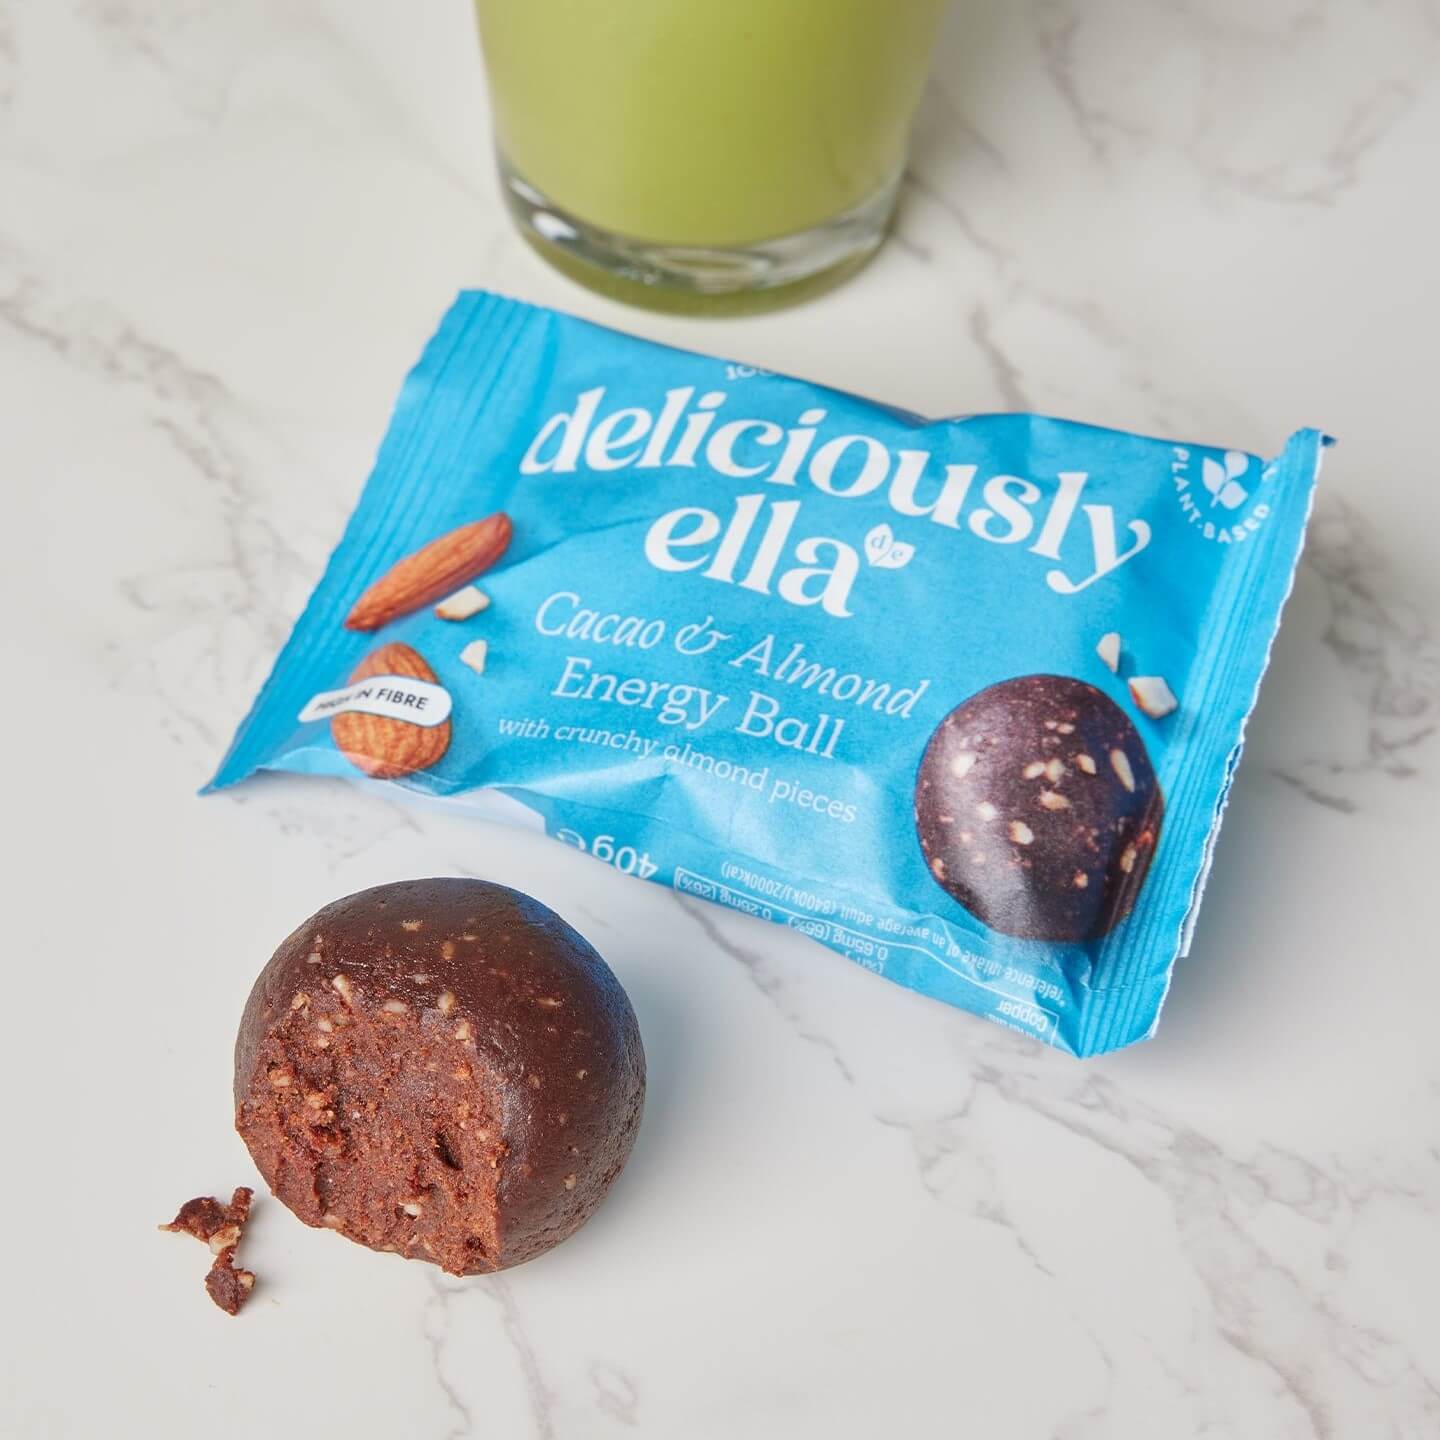 A glimpse of diverse products by Deliciously Ella, supporting the UK economy on YouK.